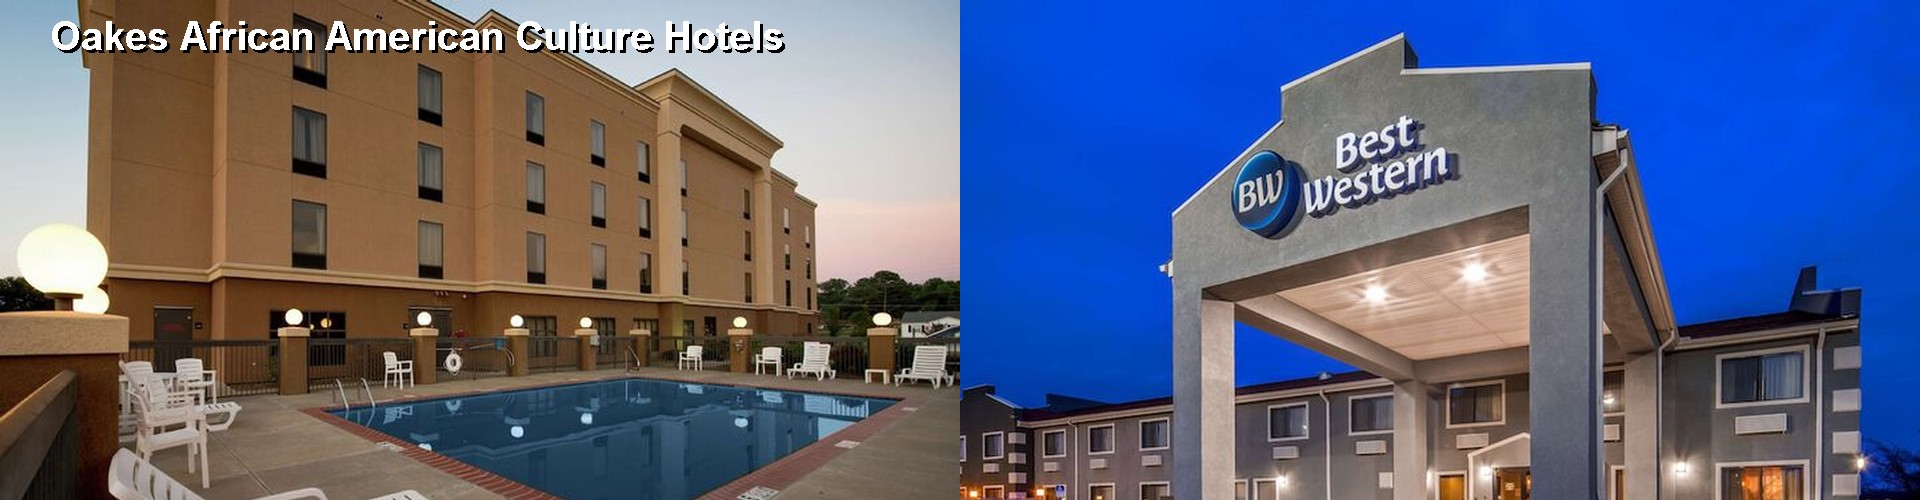 3 Best Hotels near Oakes African American Culture